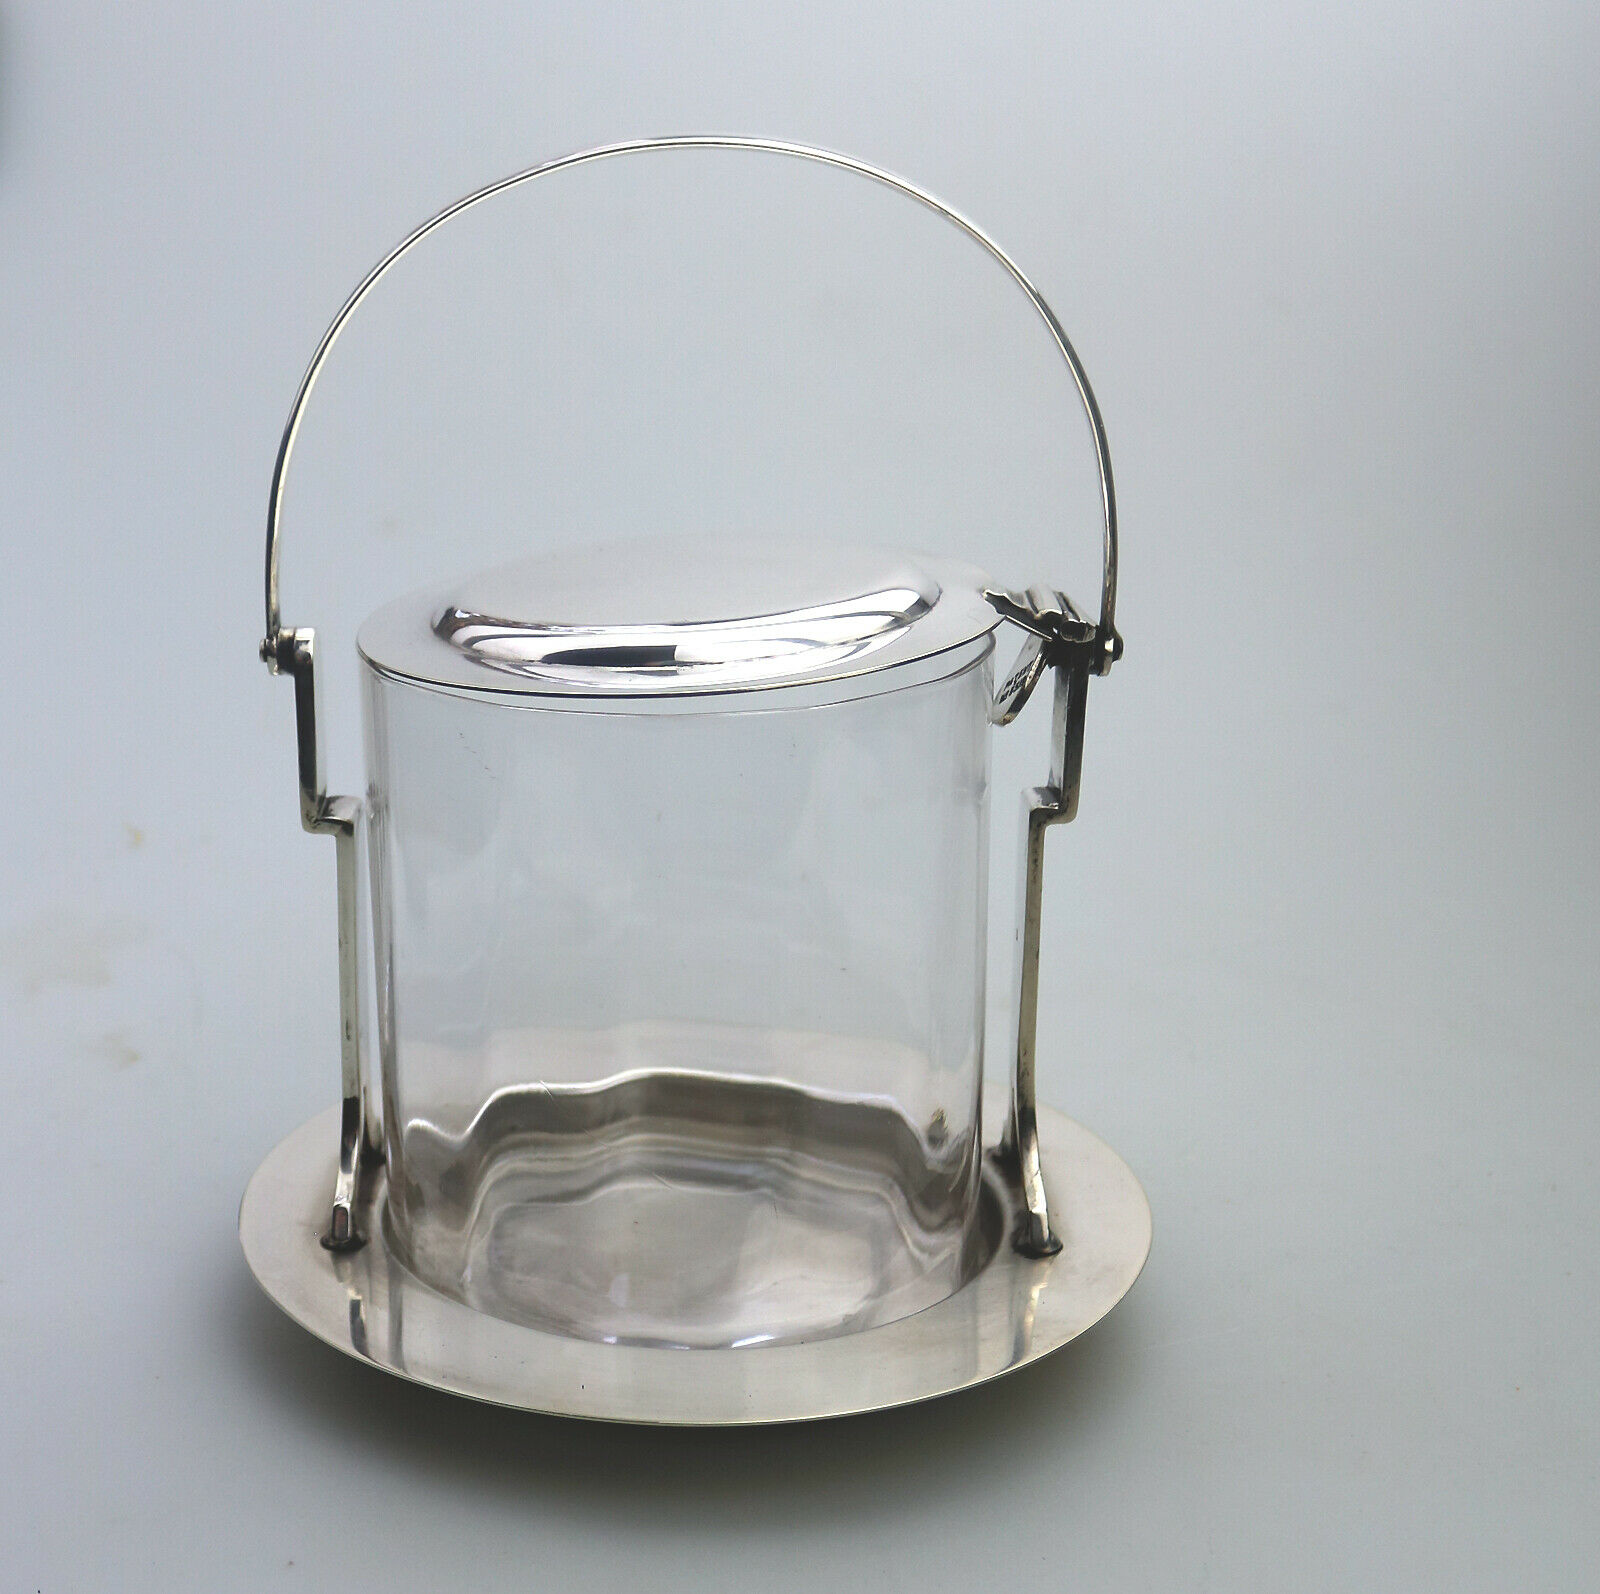 An Art Deco Novelty Silver Plate automatic opening Biscuit Jar by Hukin & Heath C.1920 - Image 6 of 9